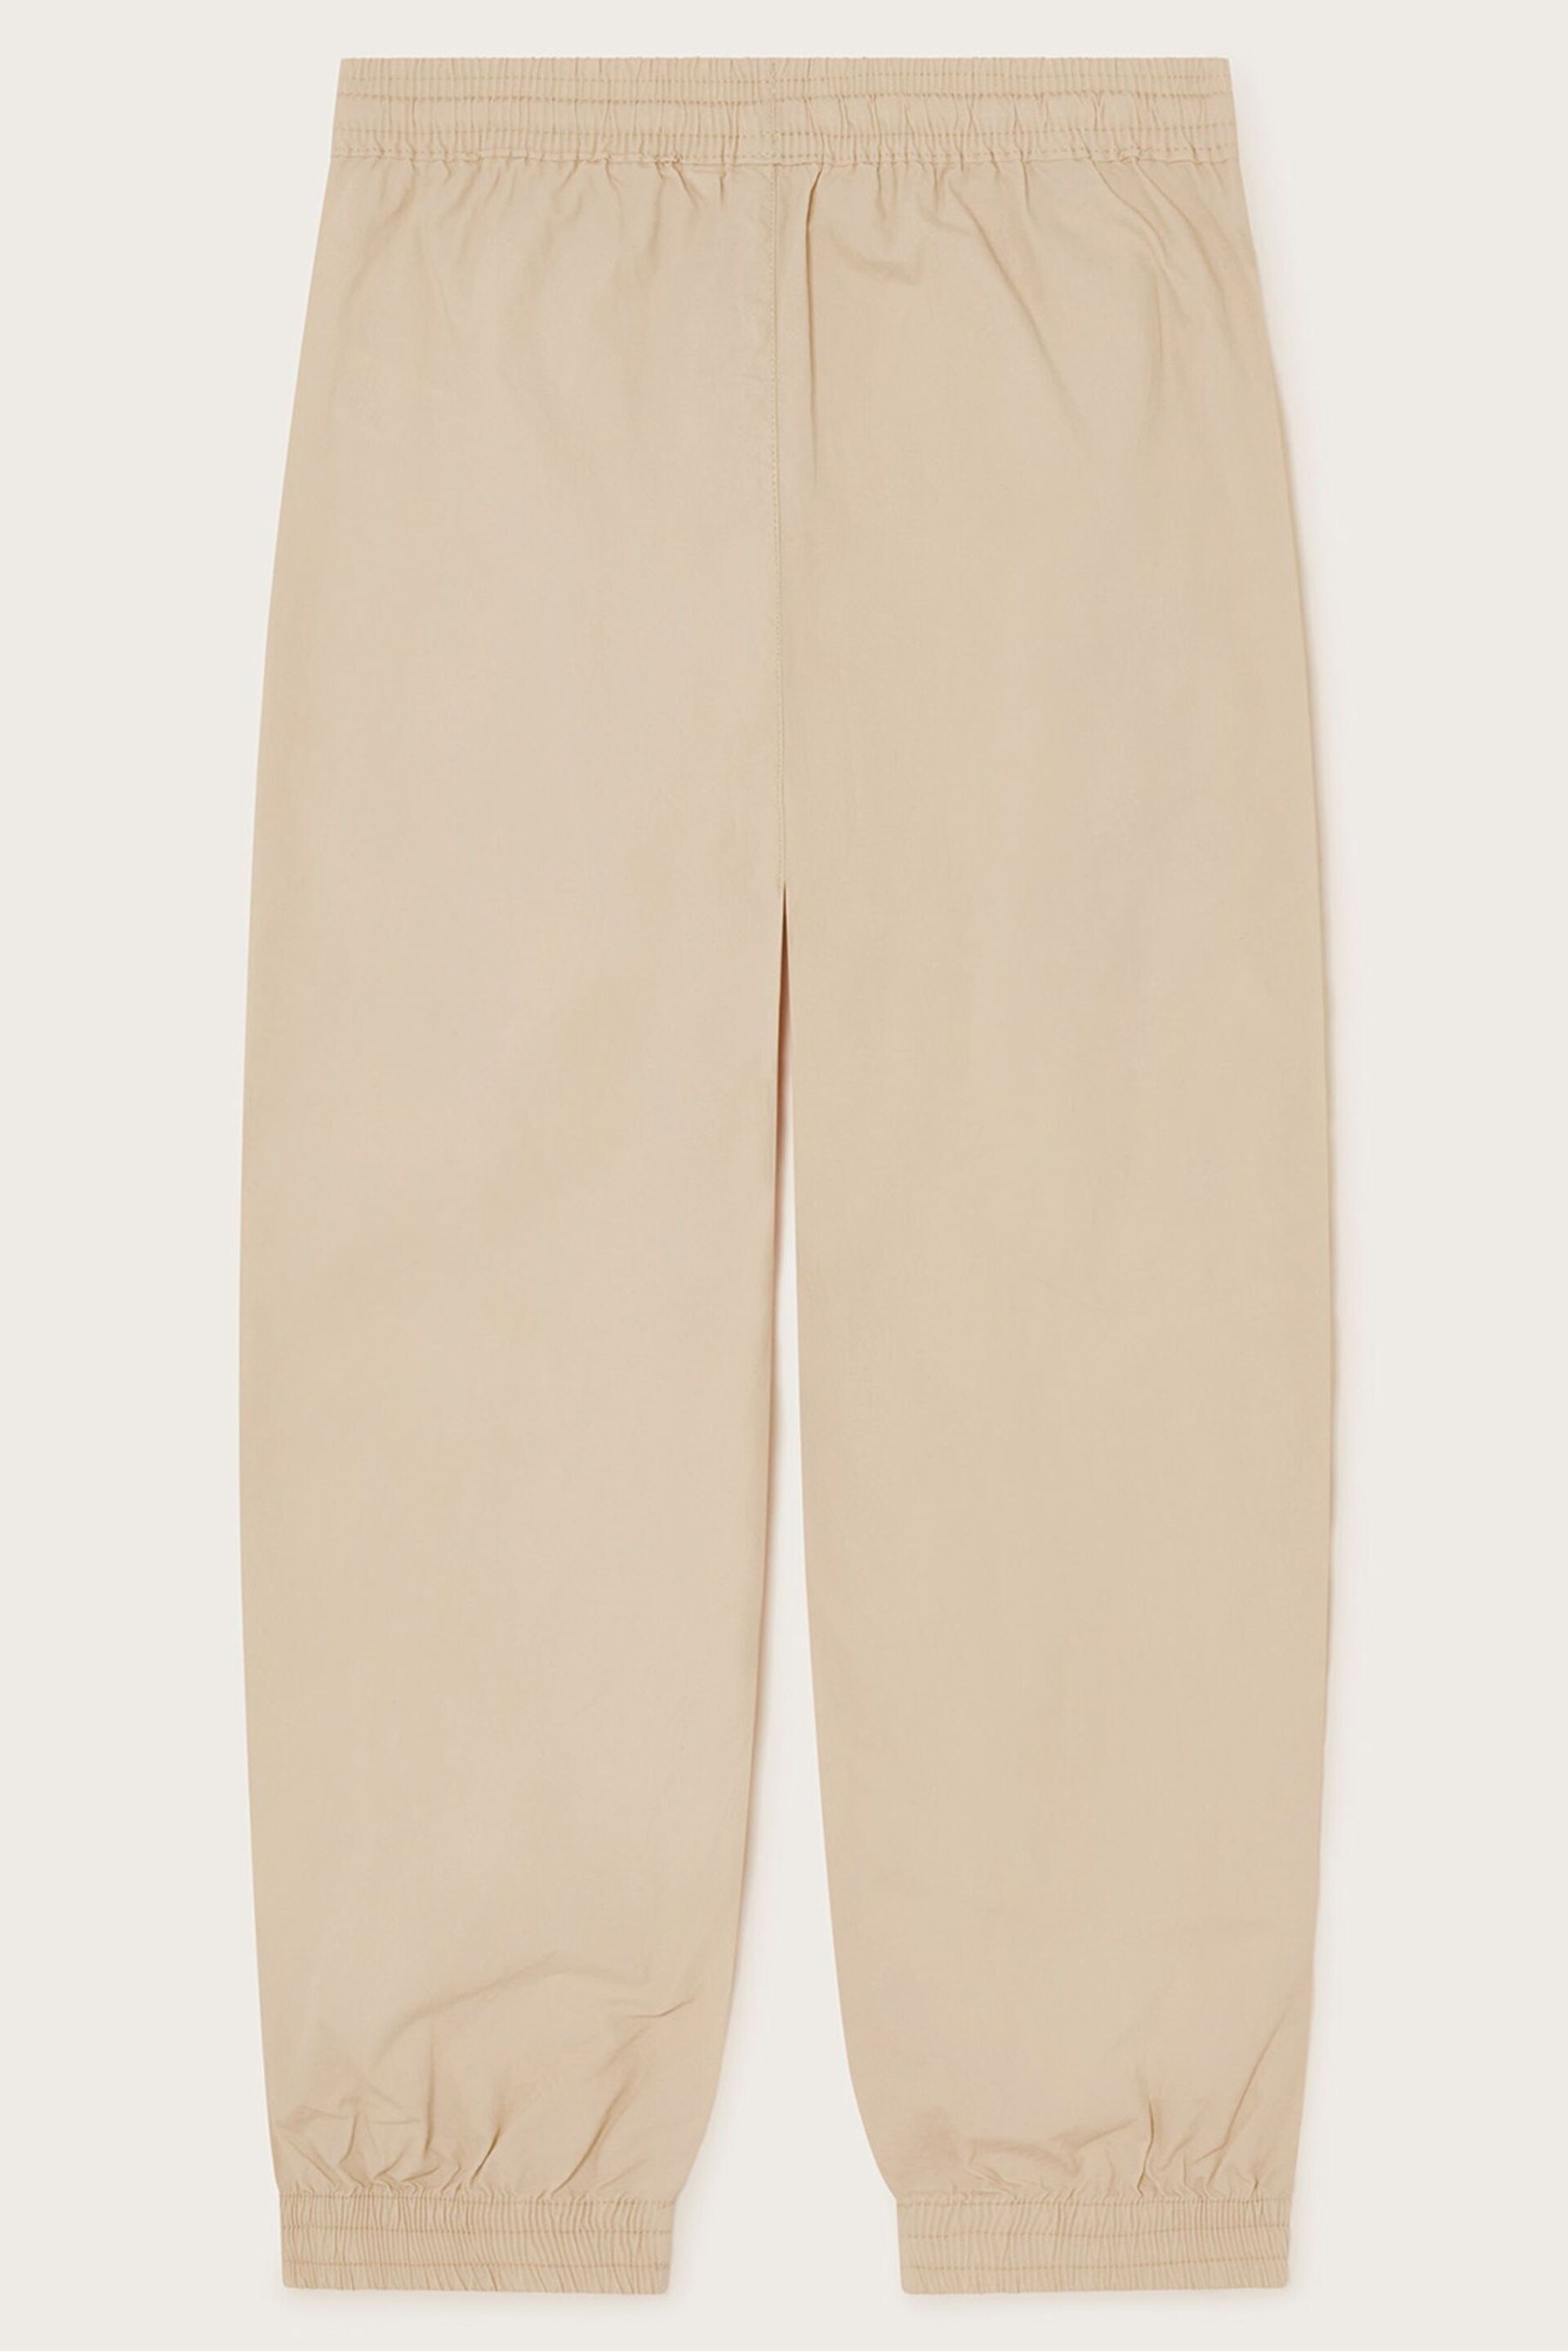 Monsoon Natural Embroidered Cargo Trousers - Image 2 of 3